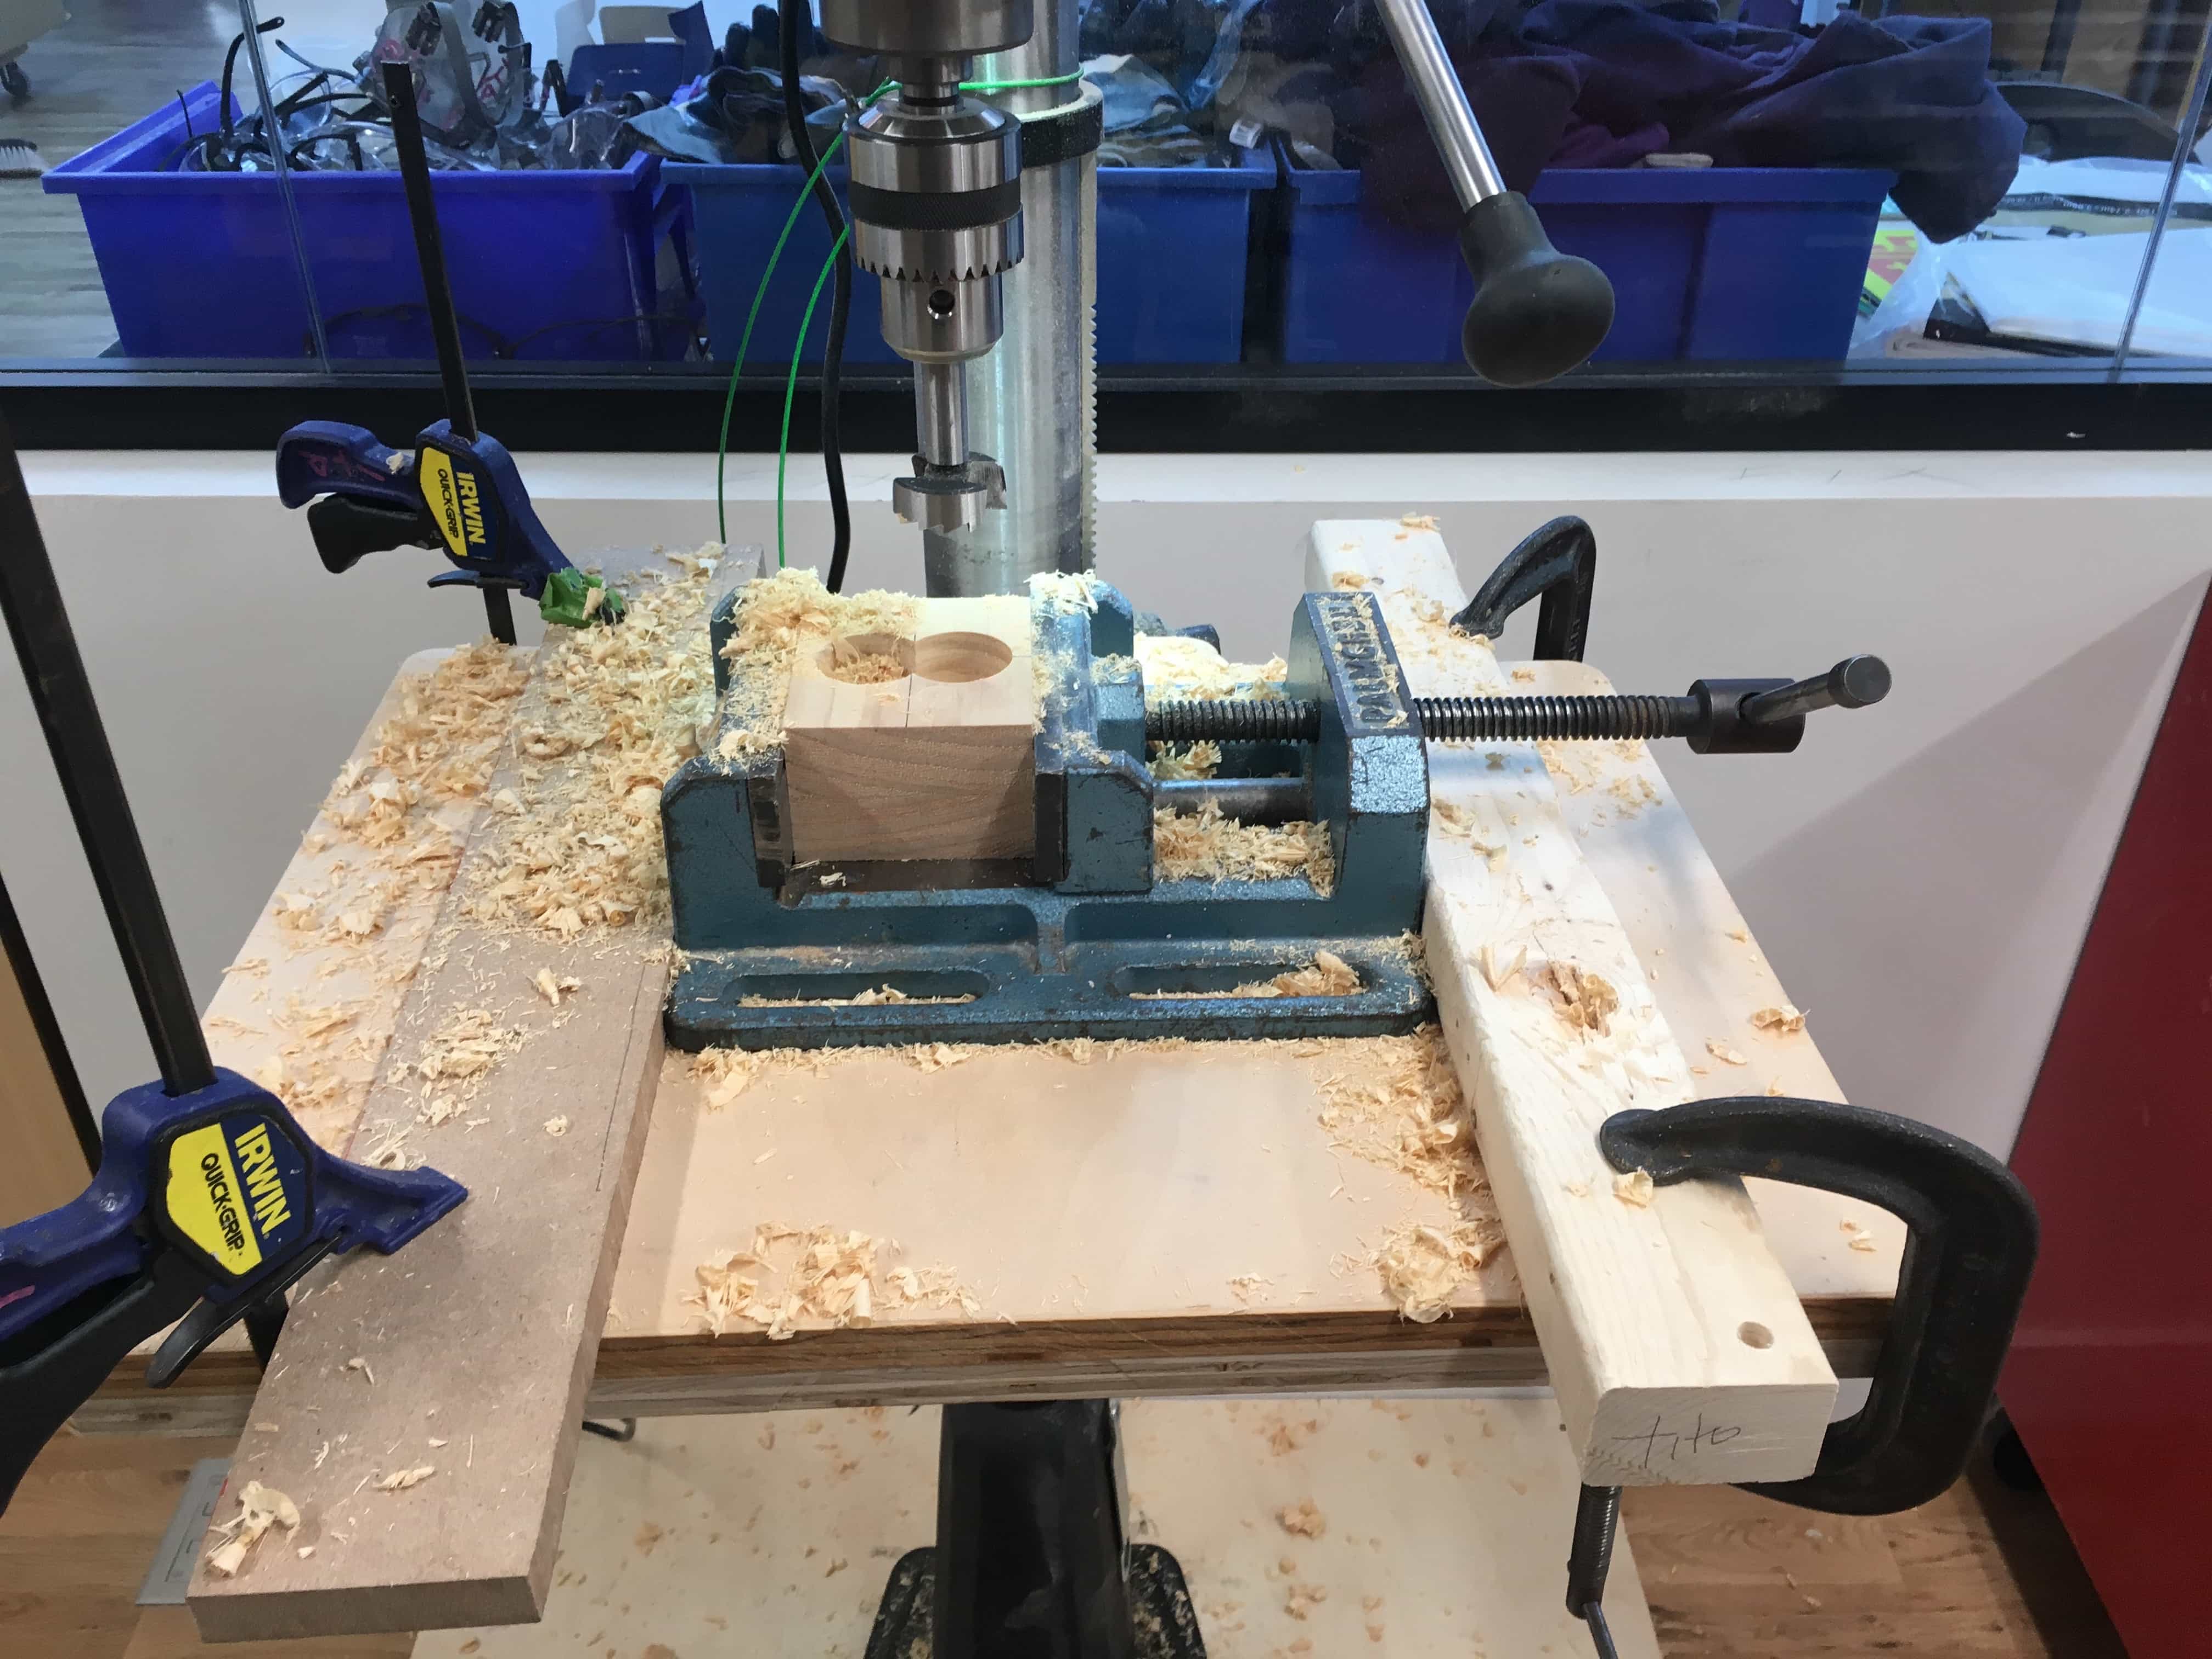 Block of wood in clamp, secured to drill press. Two holes have been drilled.